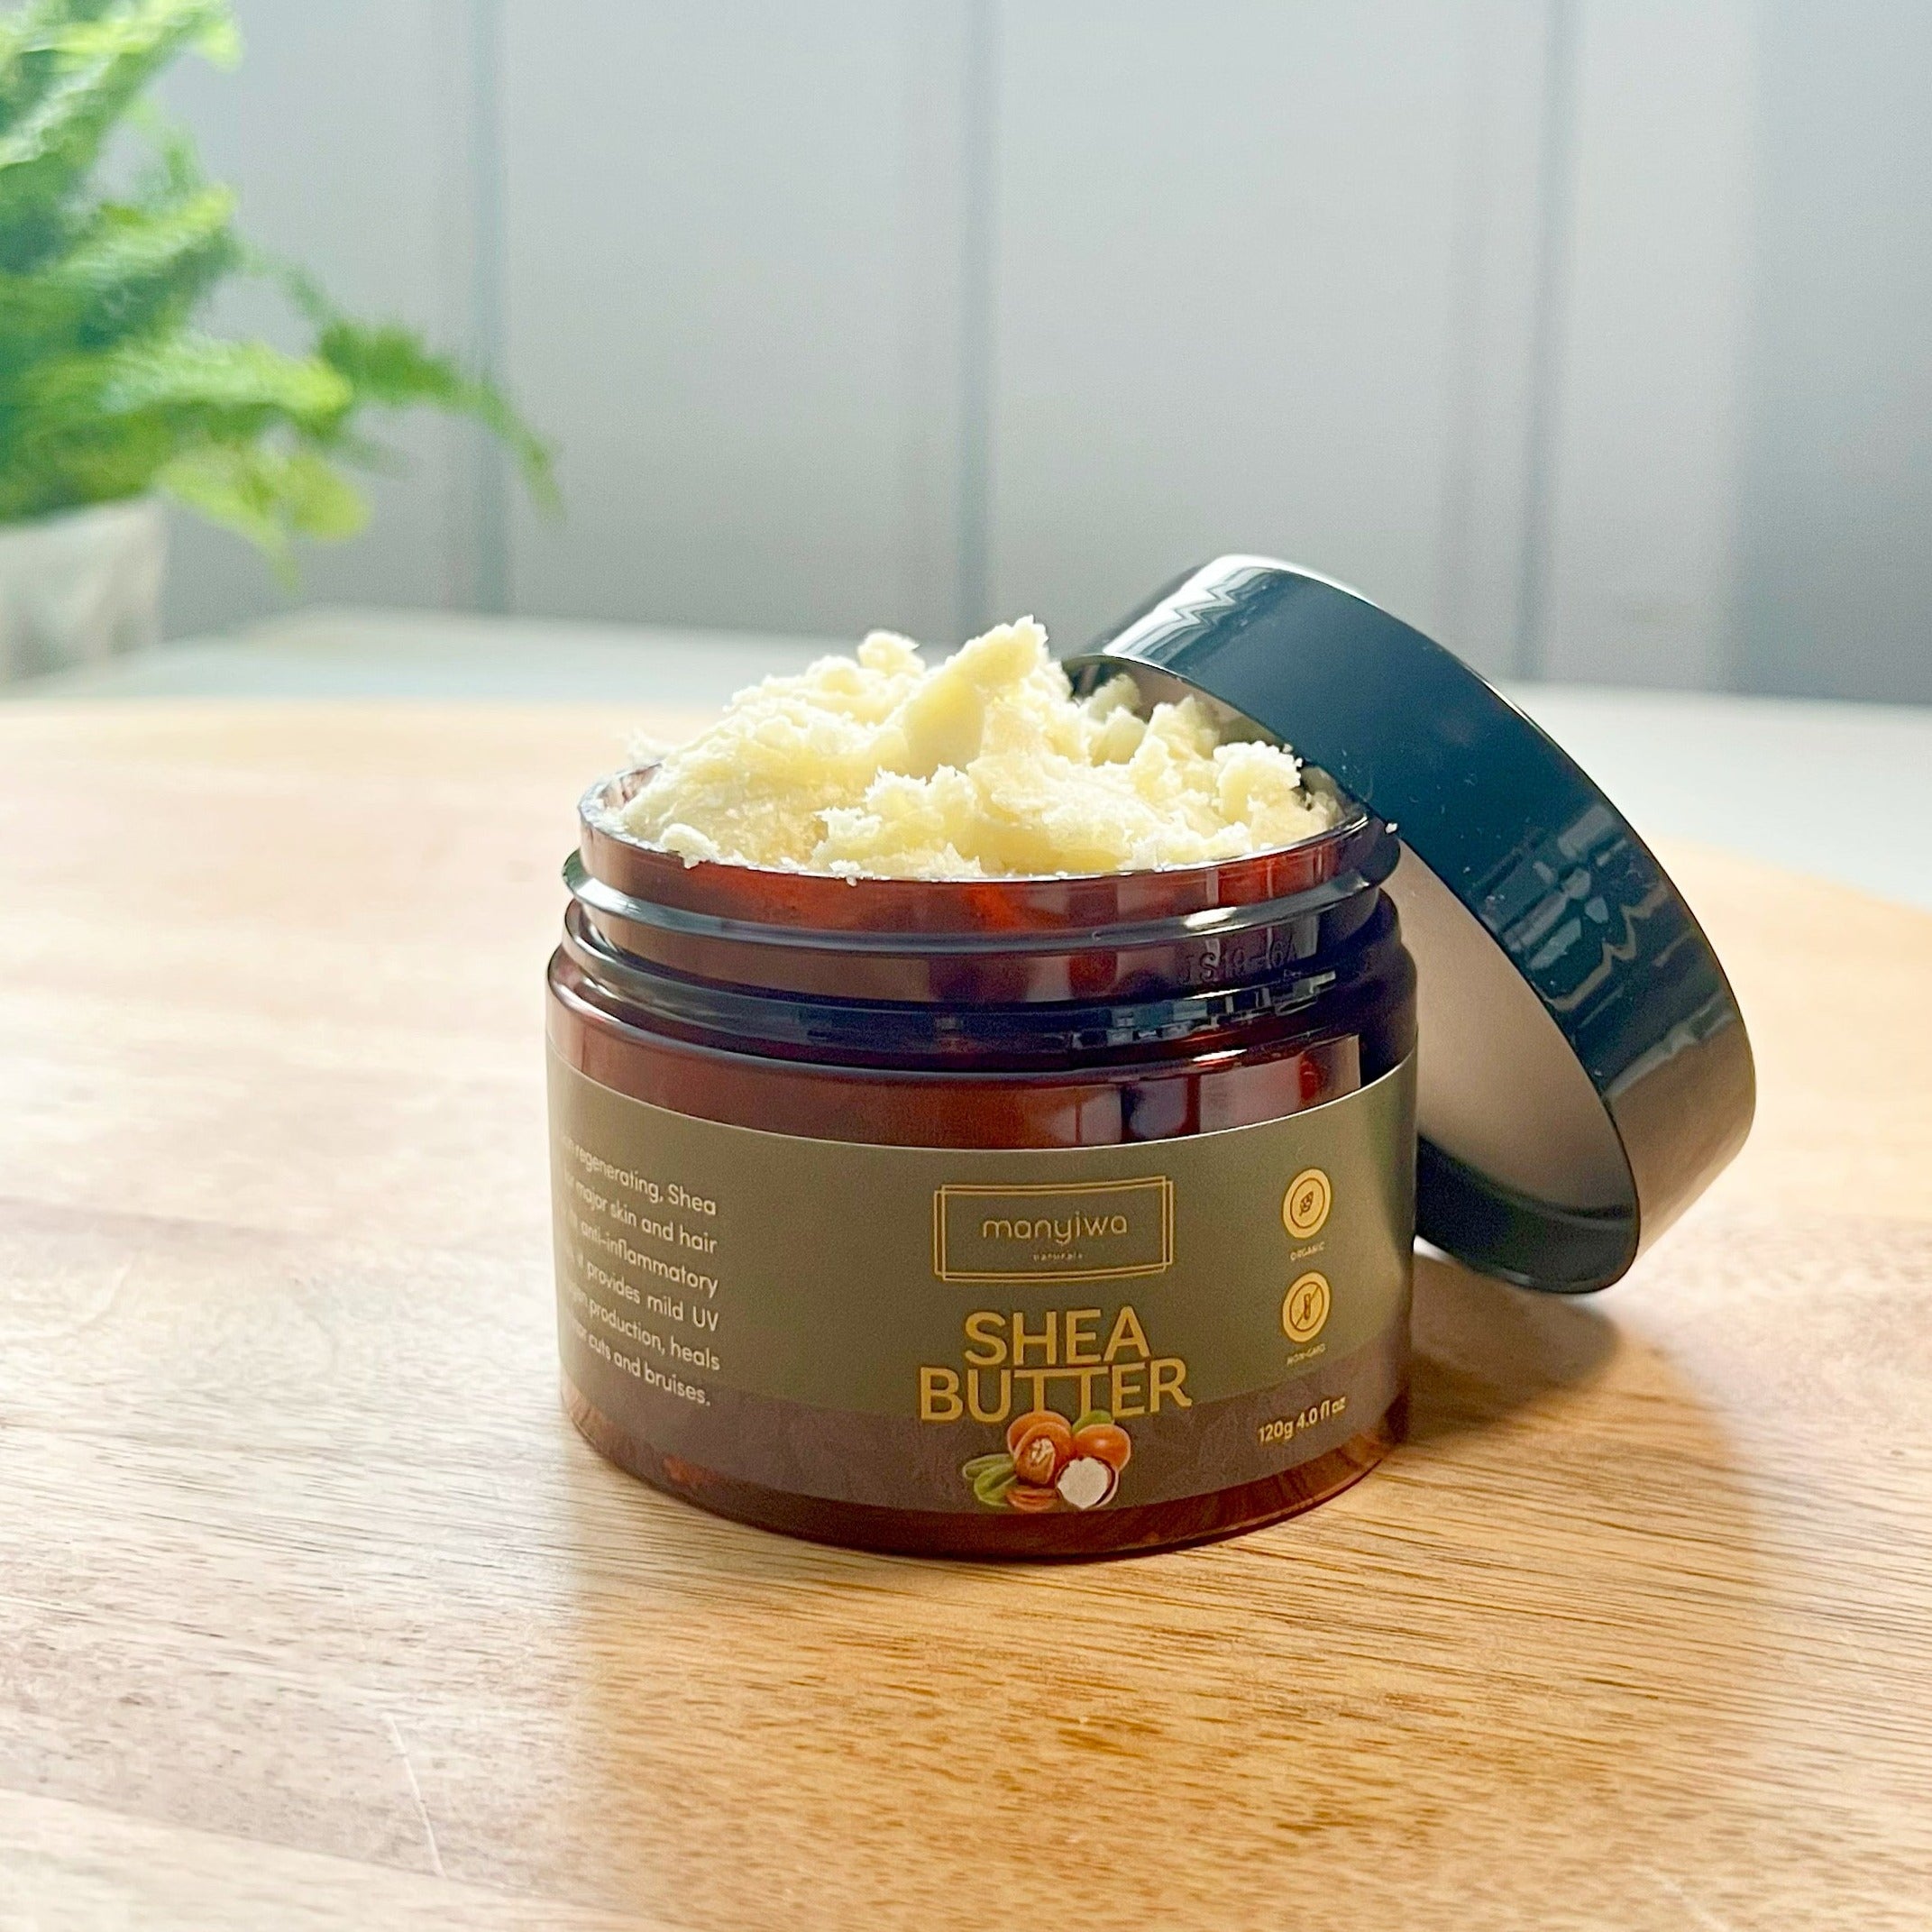 Melting Body Balm with Shea Butter